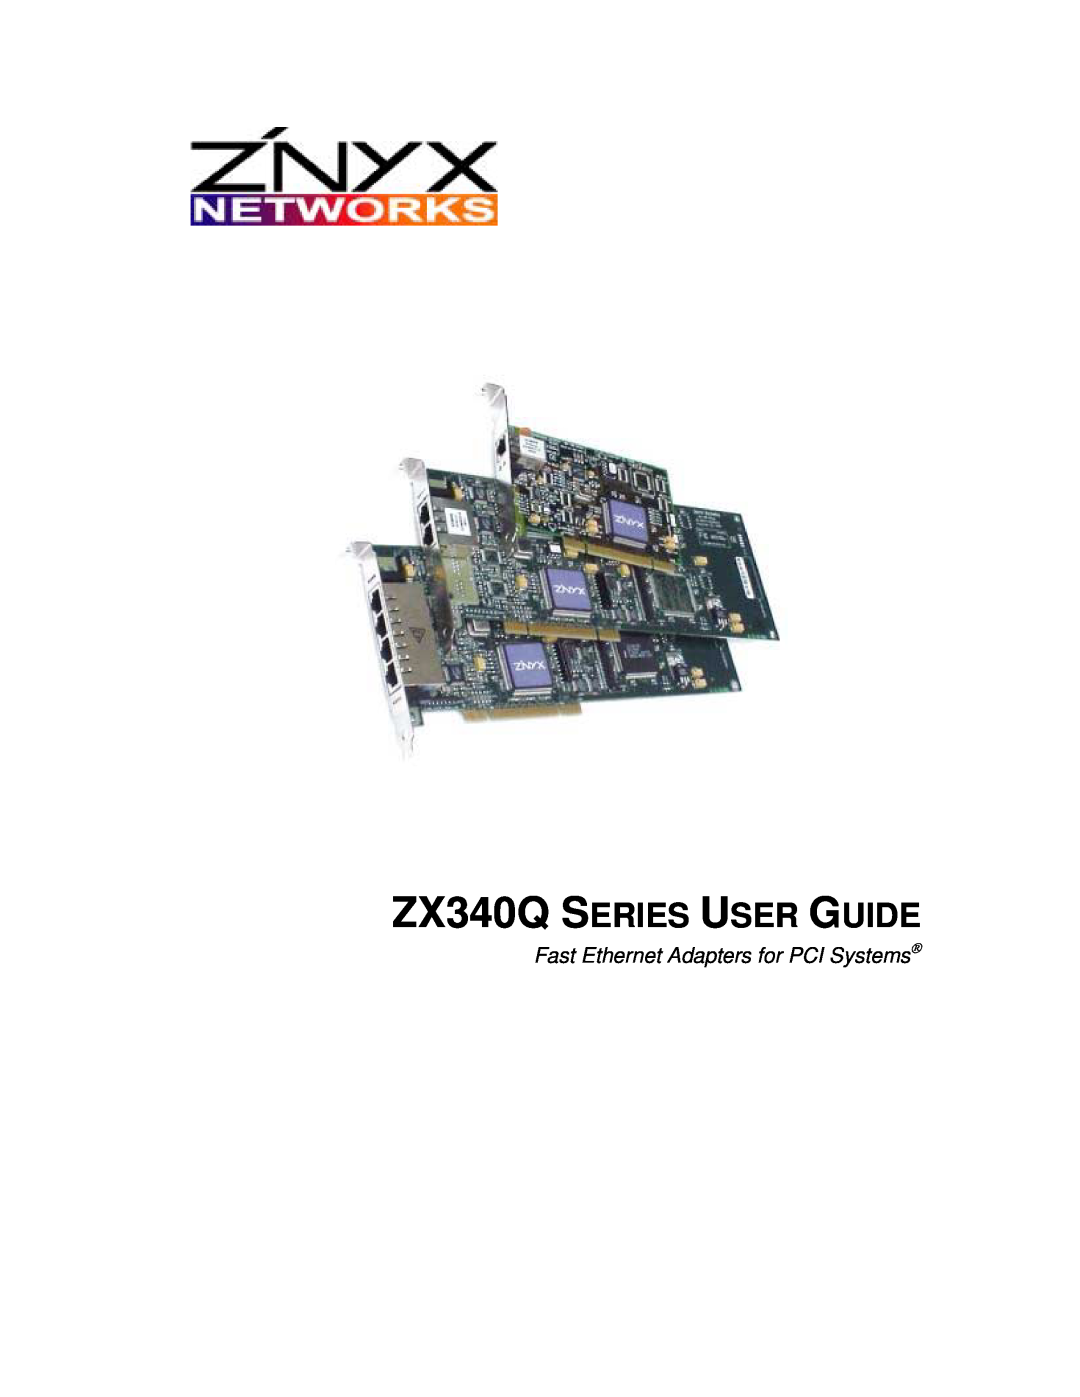 Znyx Networks manual ZX340Q SERIES USER GUIDE, Fast Ethernet Adapters for PCI Systems 